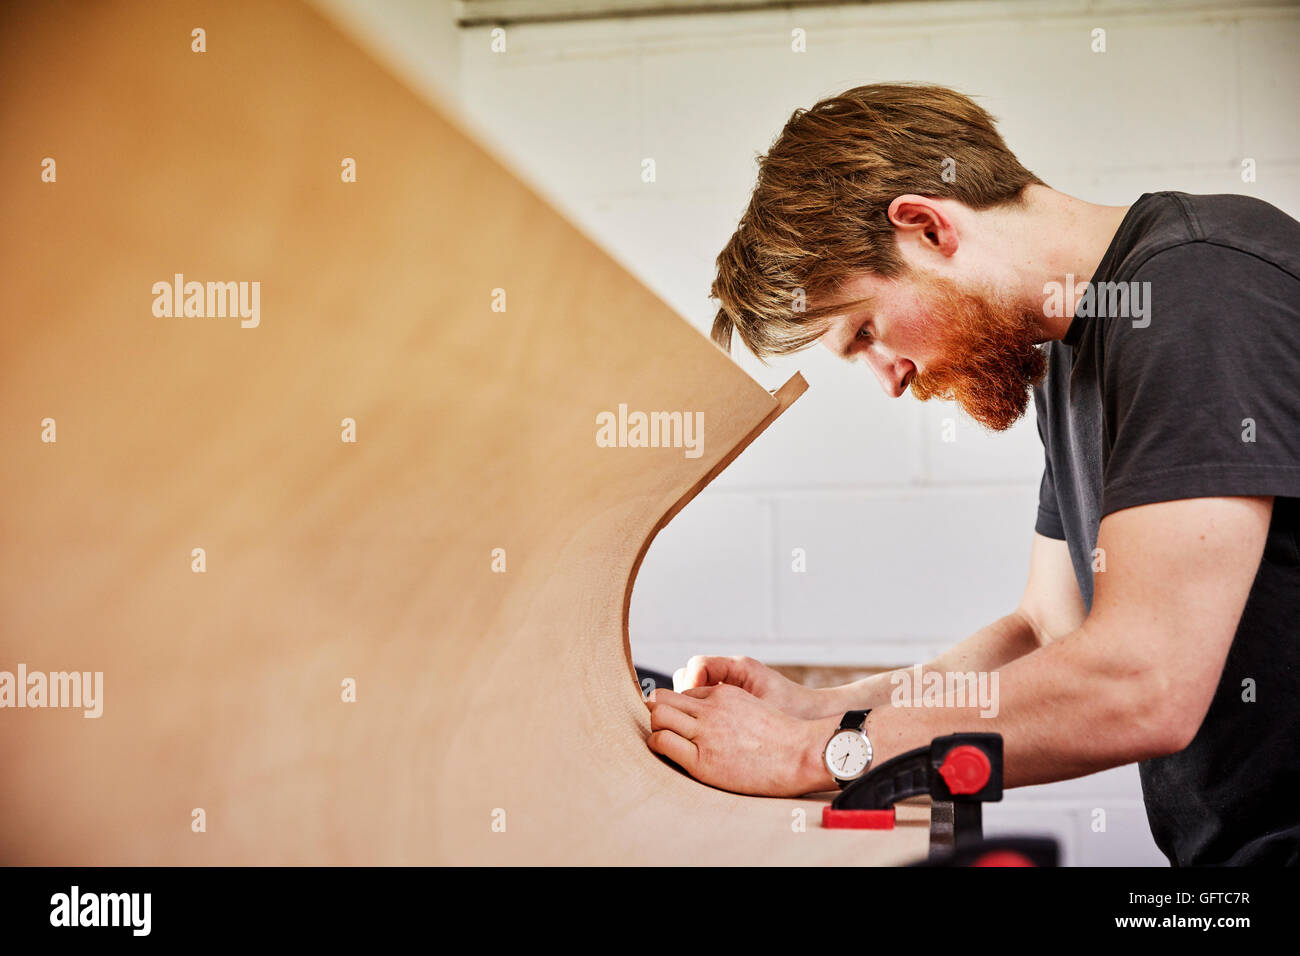 A  man using a tool on the curved cut out edge of a piece of wood Stock Photo